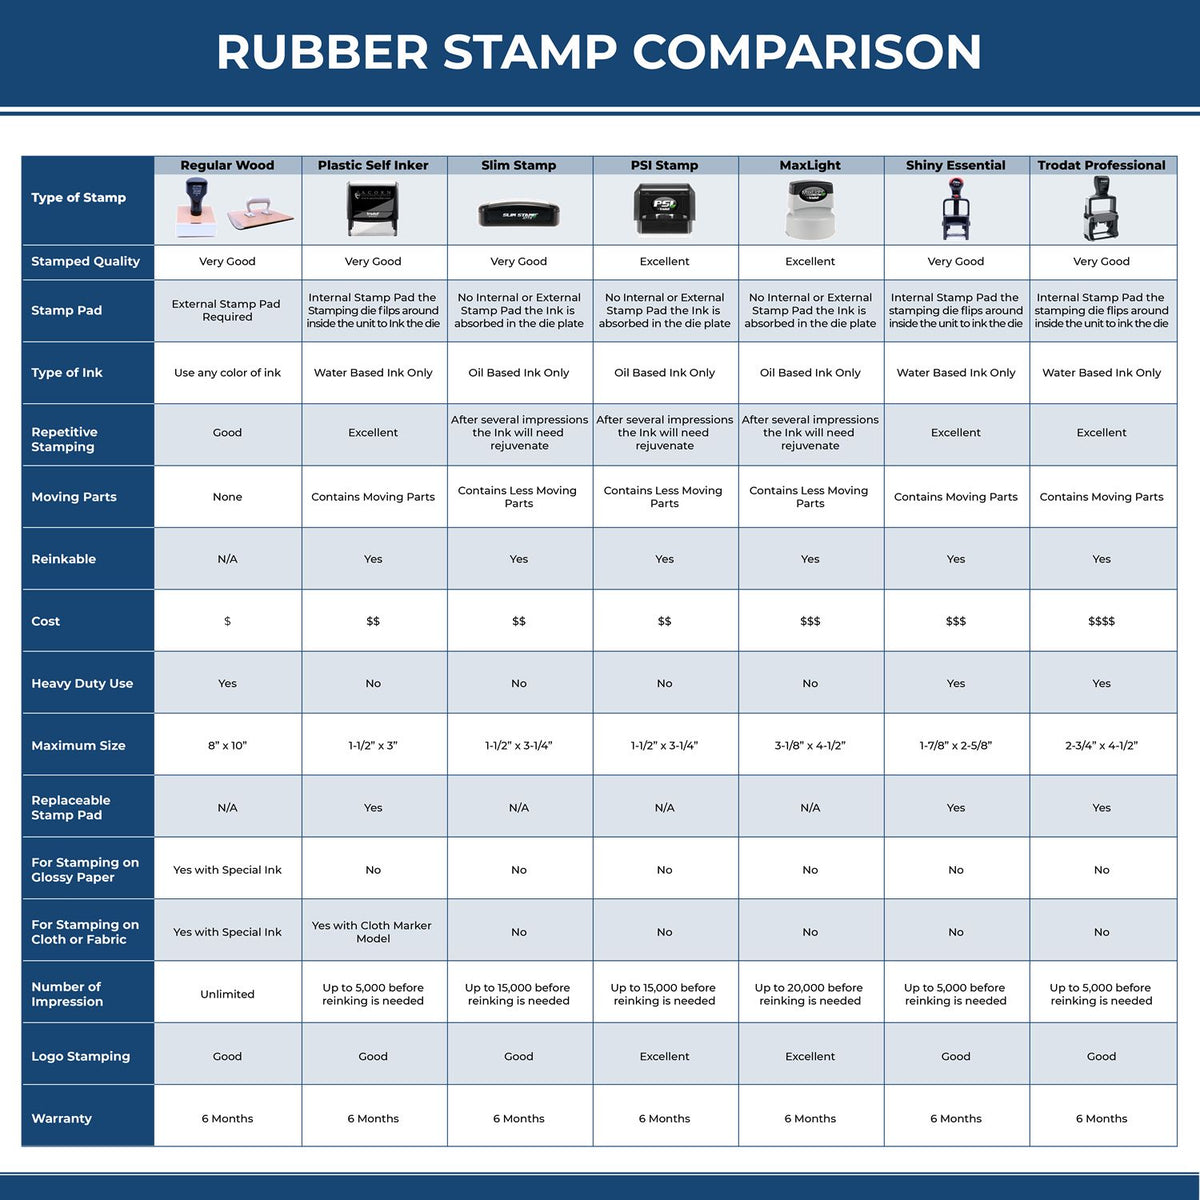 Public Weighmaster Self Inking Rubber Stamp of Seal 3006WE Rubber Stamp Comparison